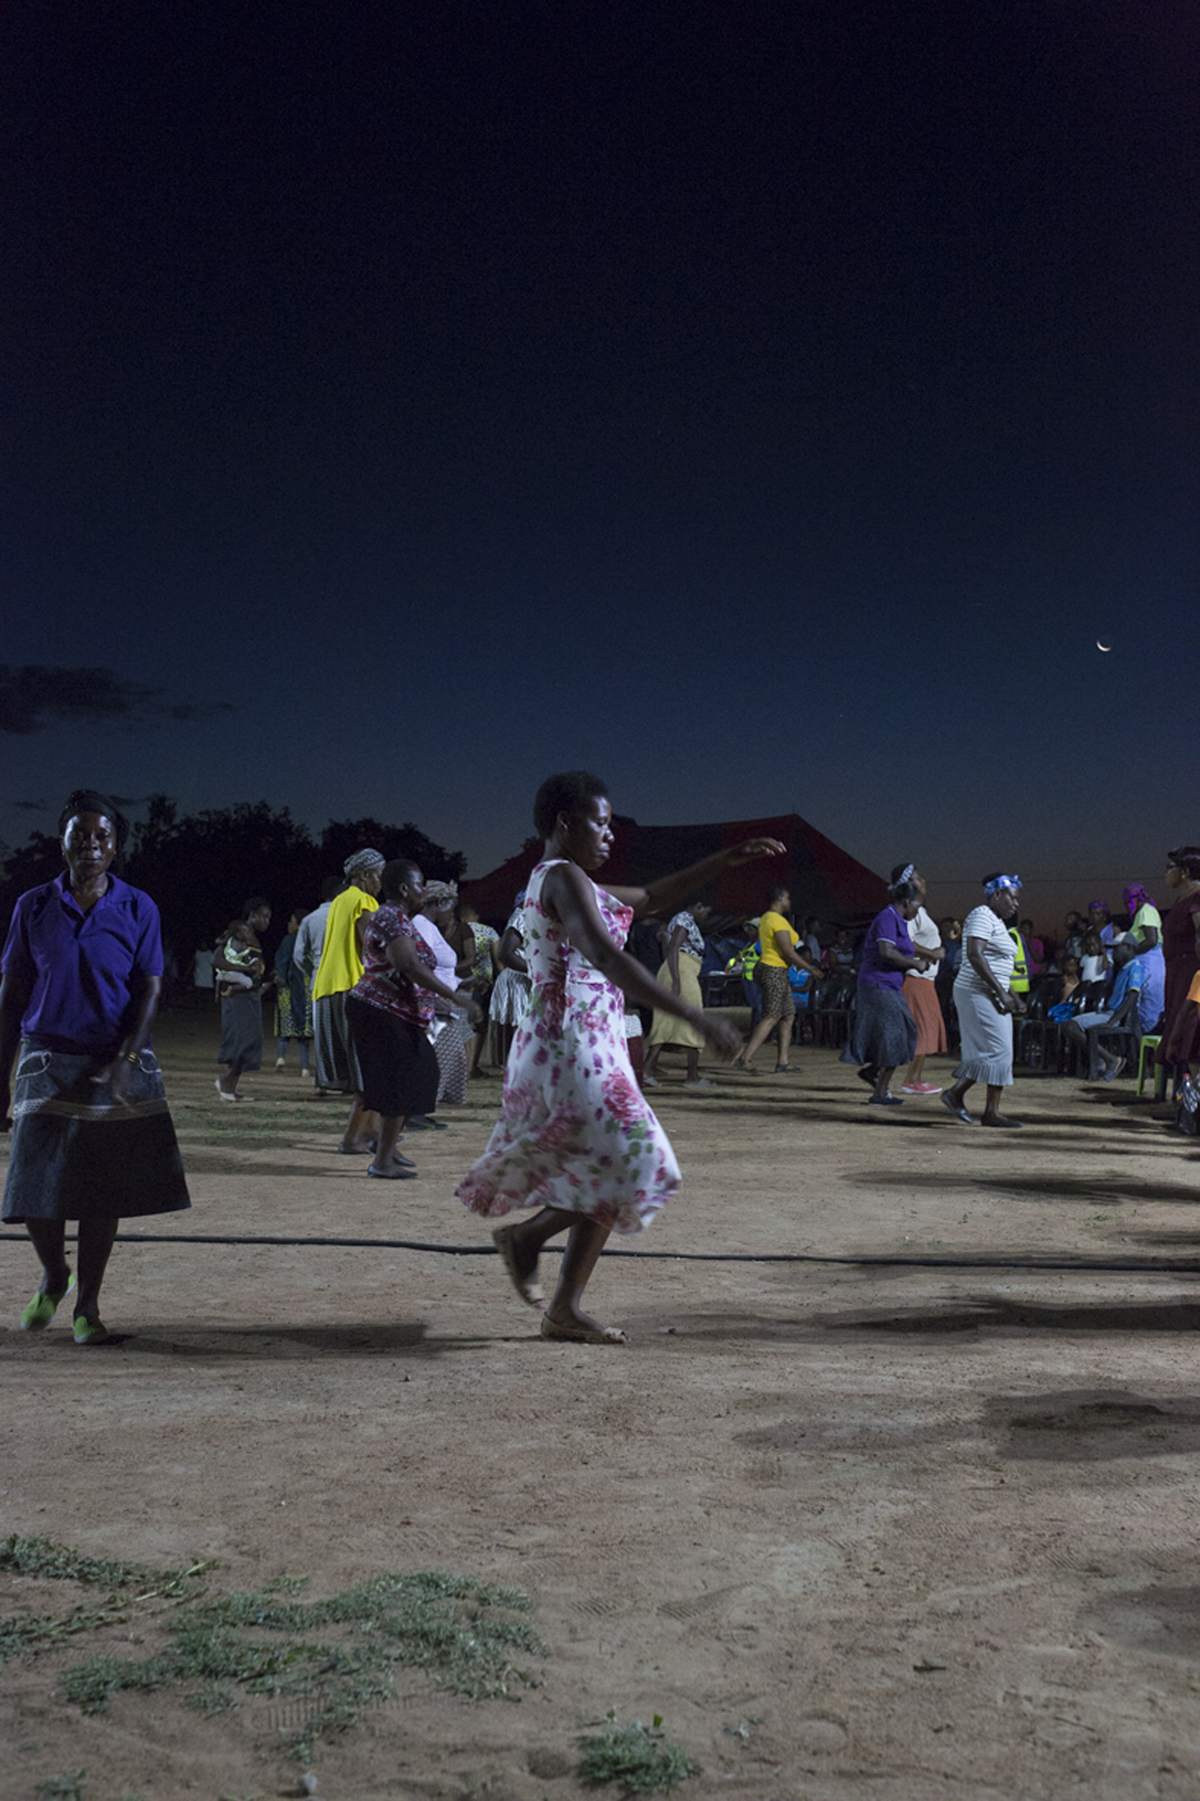 Giya Makondo-Wills, “They Came From The Water While The World Watched” – group of middle aged women dancing in front of a seated public outside at night